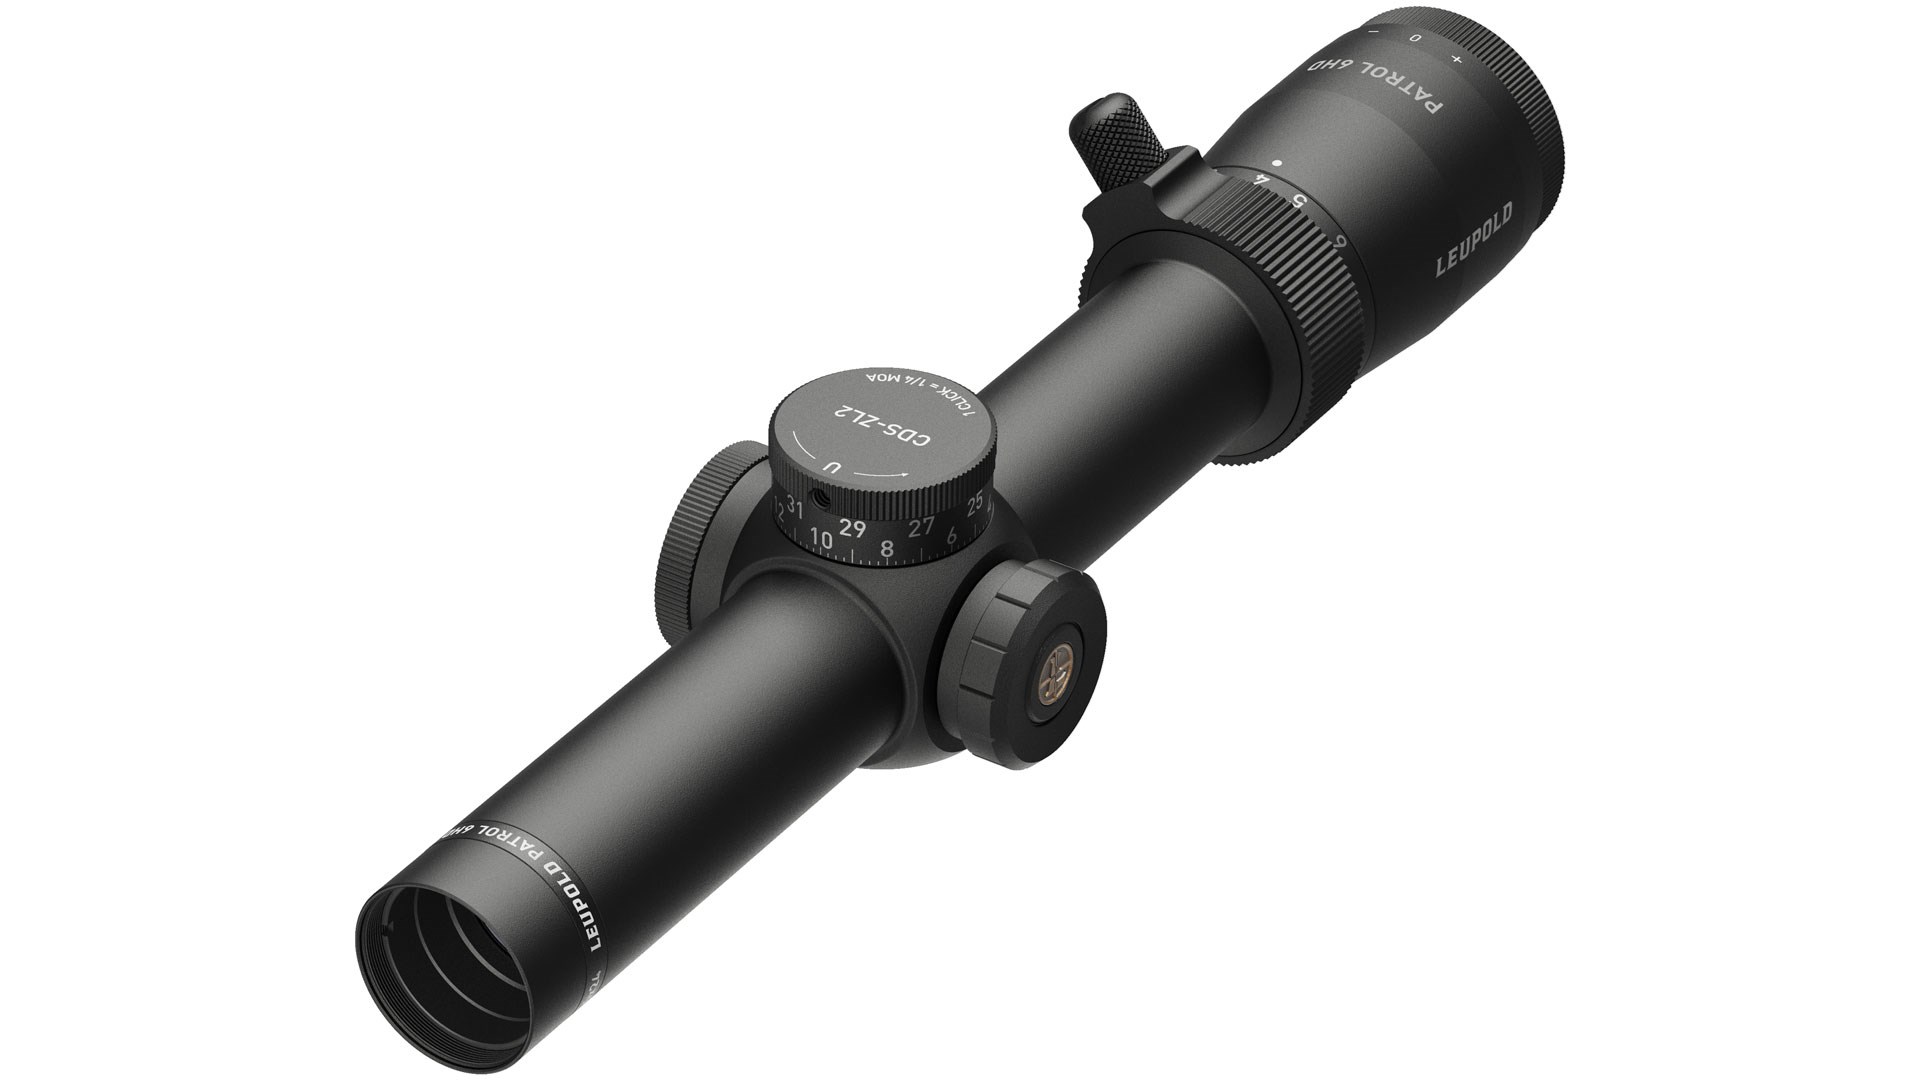 Leupold Patrol Riflescope with CDS turret on white